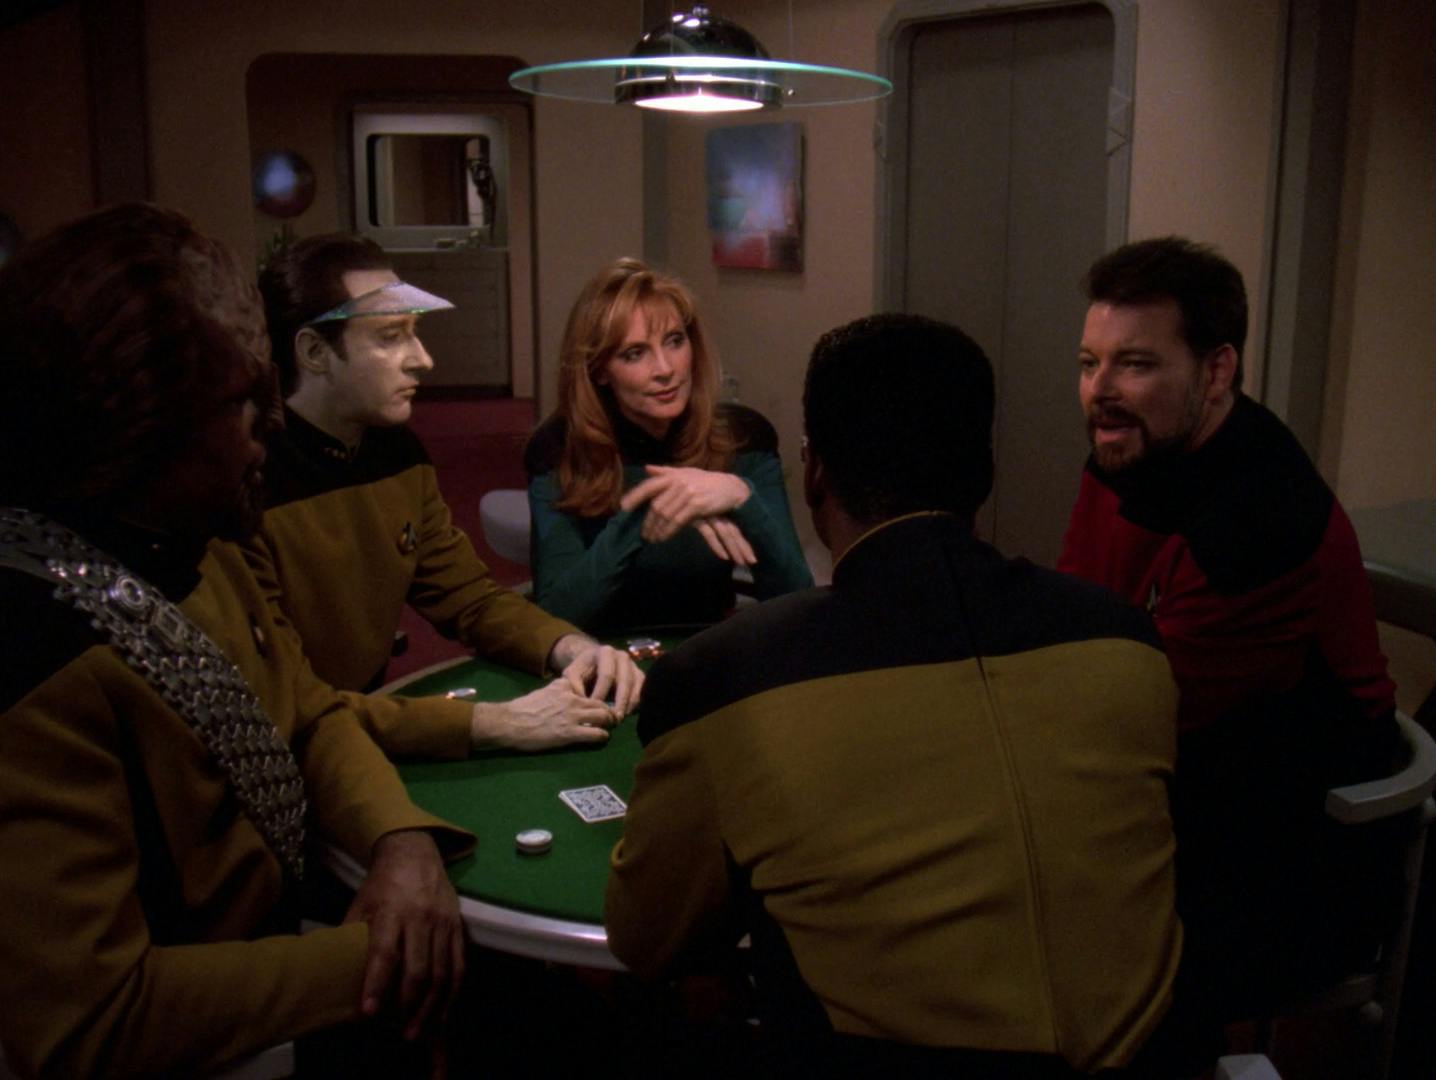 In crew quarters, sitting around a poker table, Worf, Data, Crusher, Riker, and La Forge weigh the information Picard revealed to them about the future in 'All Good Things...'